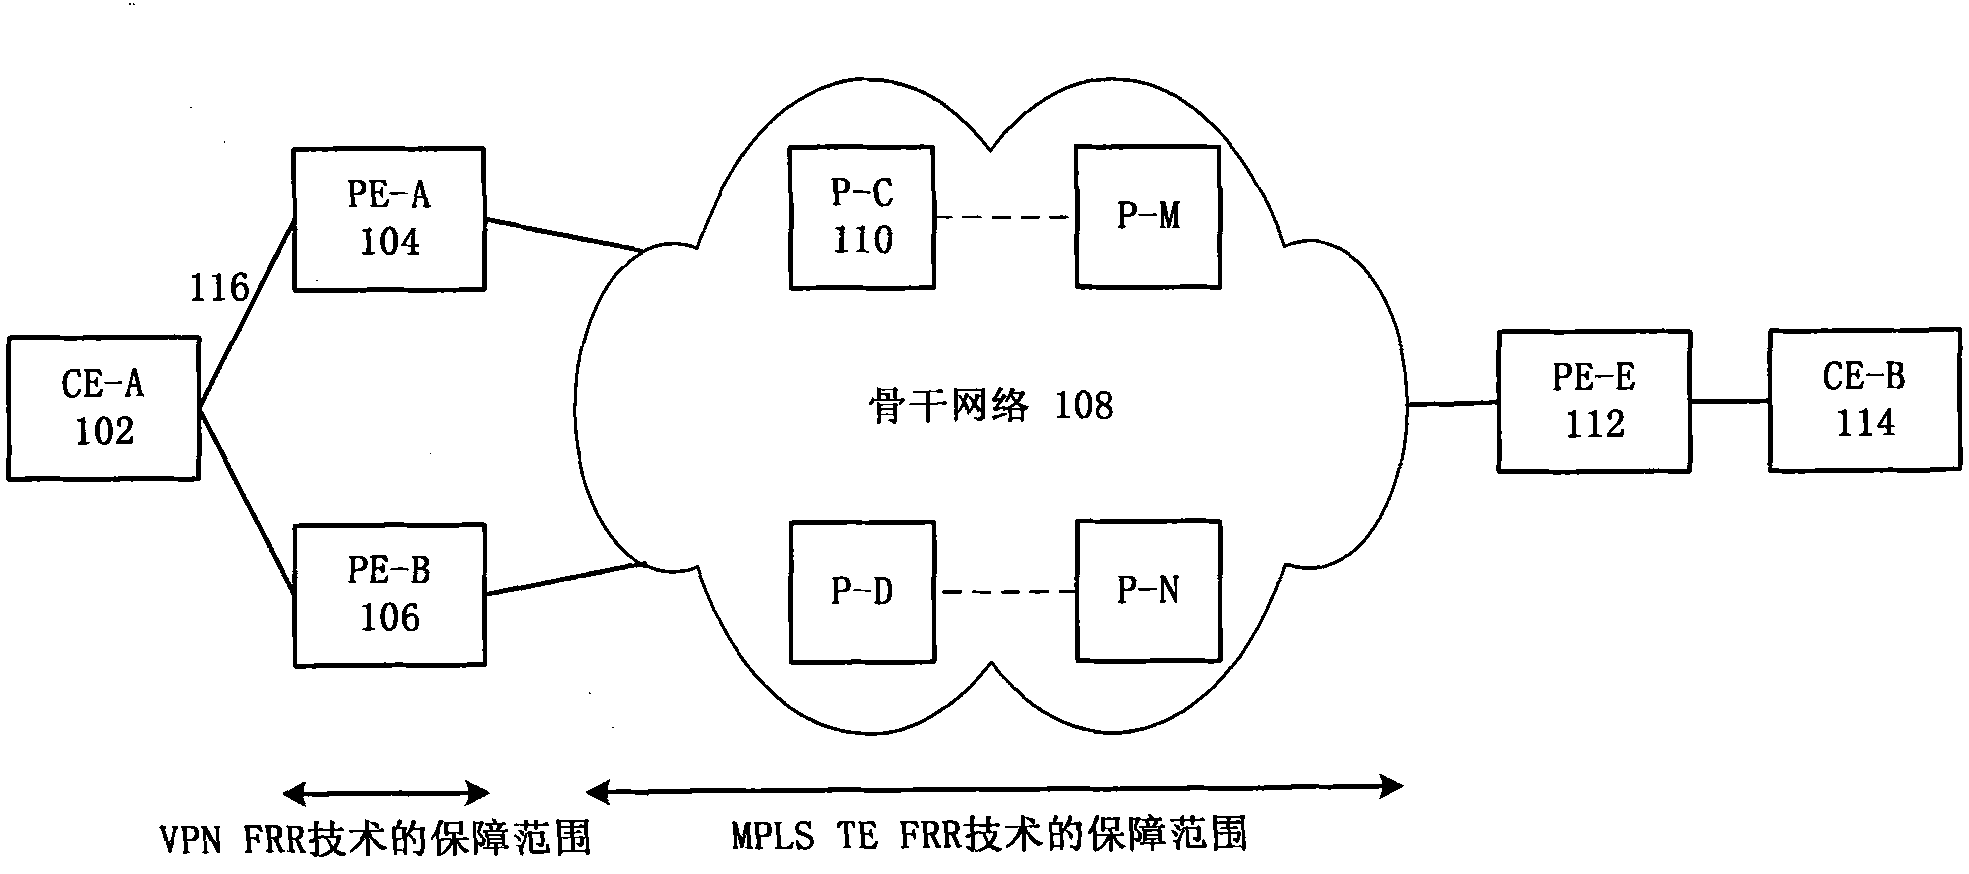 Method and system for rapidly rerouting MPLS VPN (Multi-Protocol Label Switching Virtual Private Network)